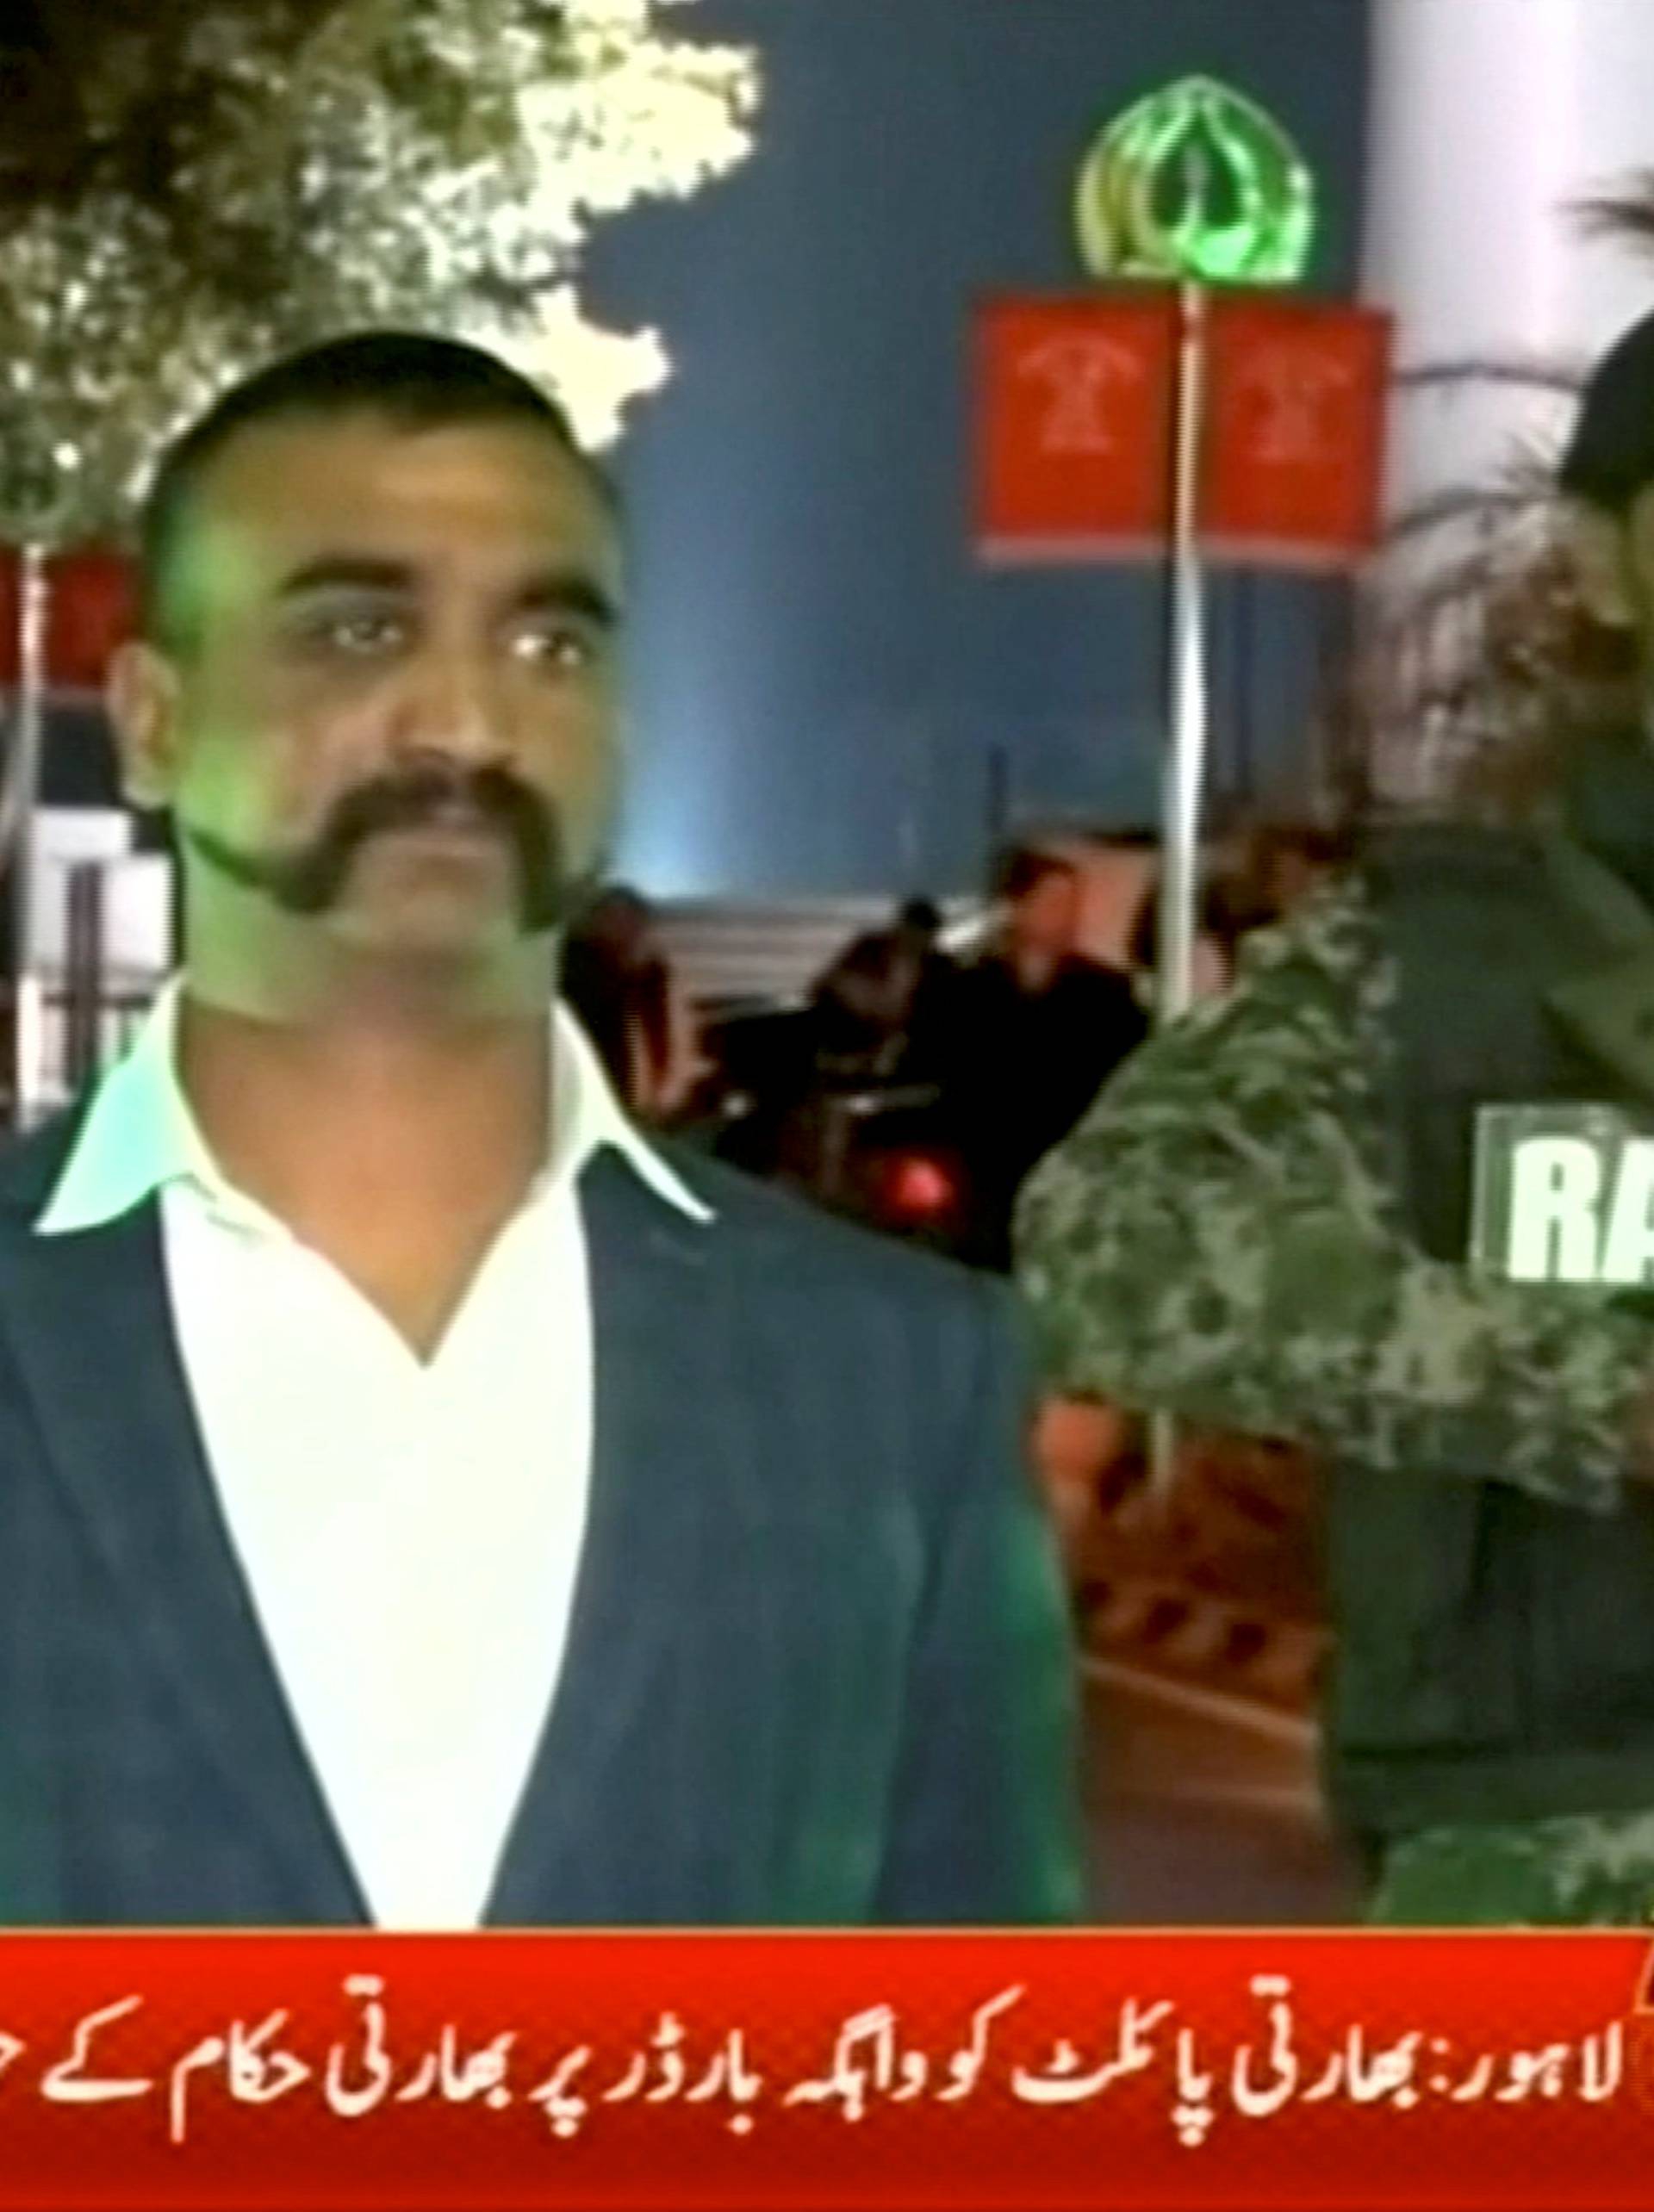 Indian pilot, Wing Commander Abhinandan, stands under armed escort near Pakistan-India border in Wagah